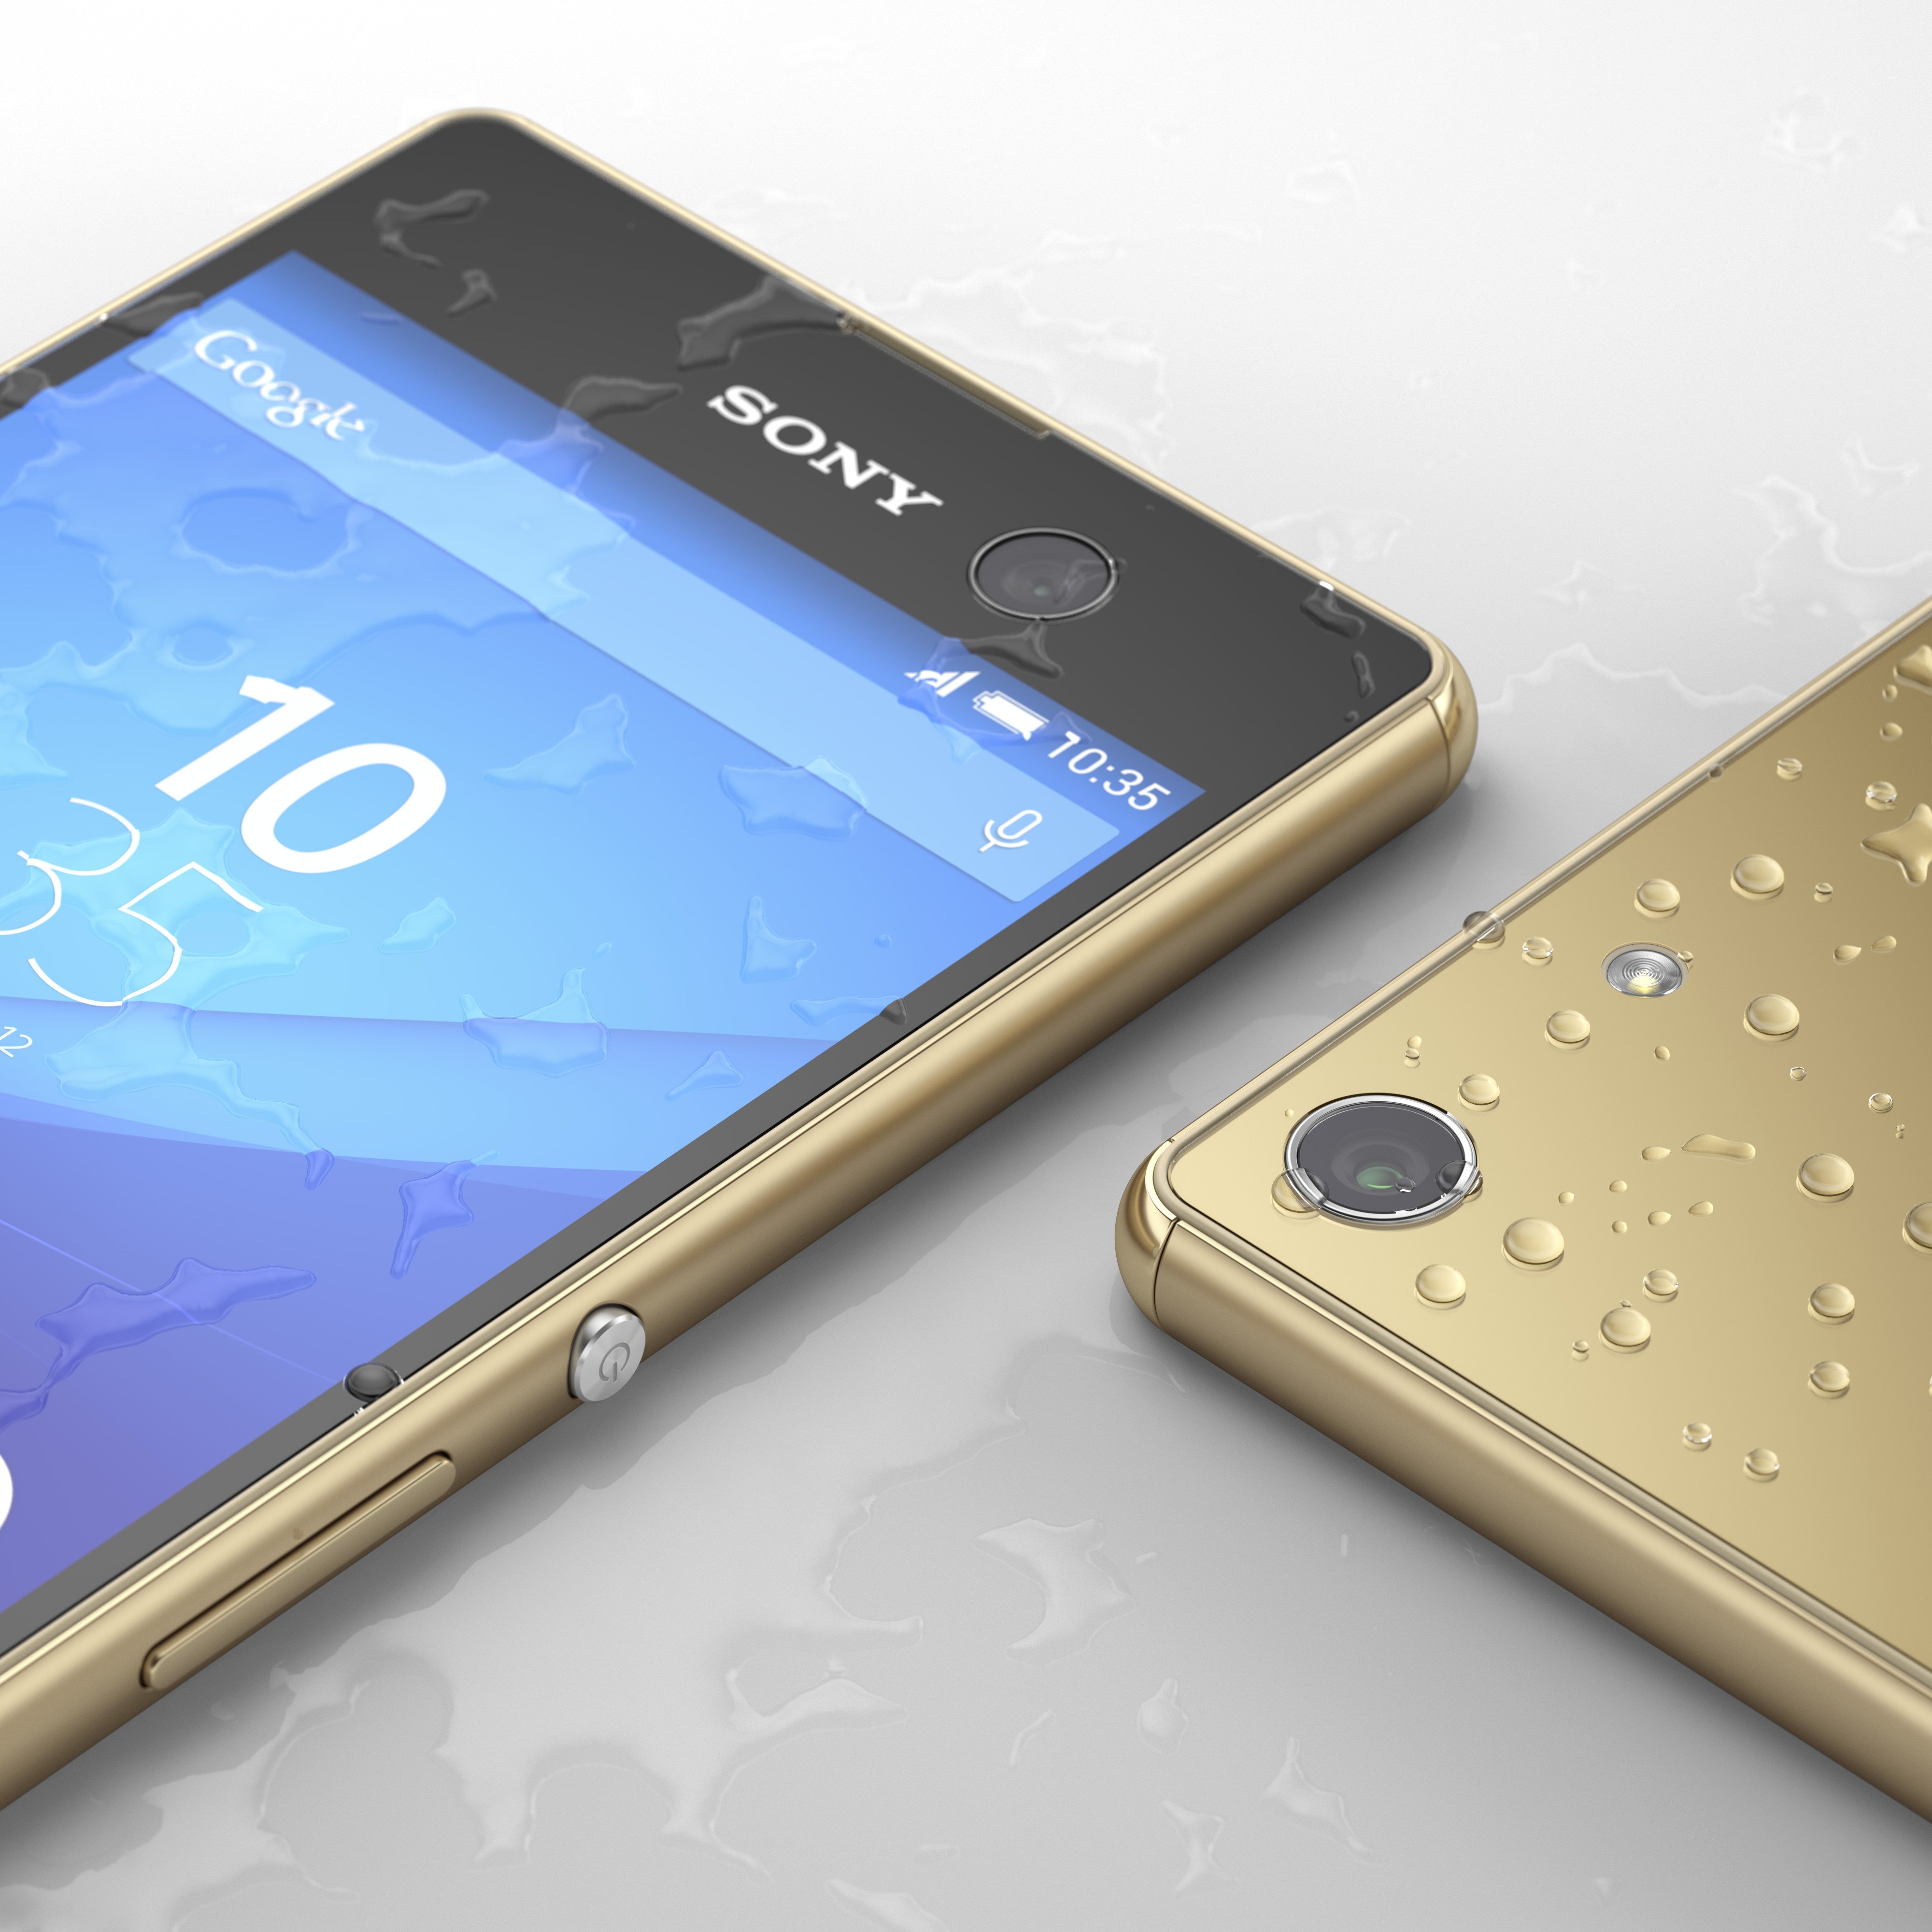 Sony Xperia M5 specs, review, release - PhonesData